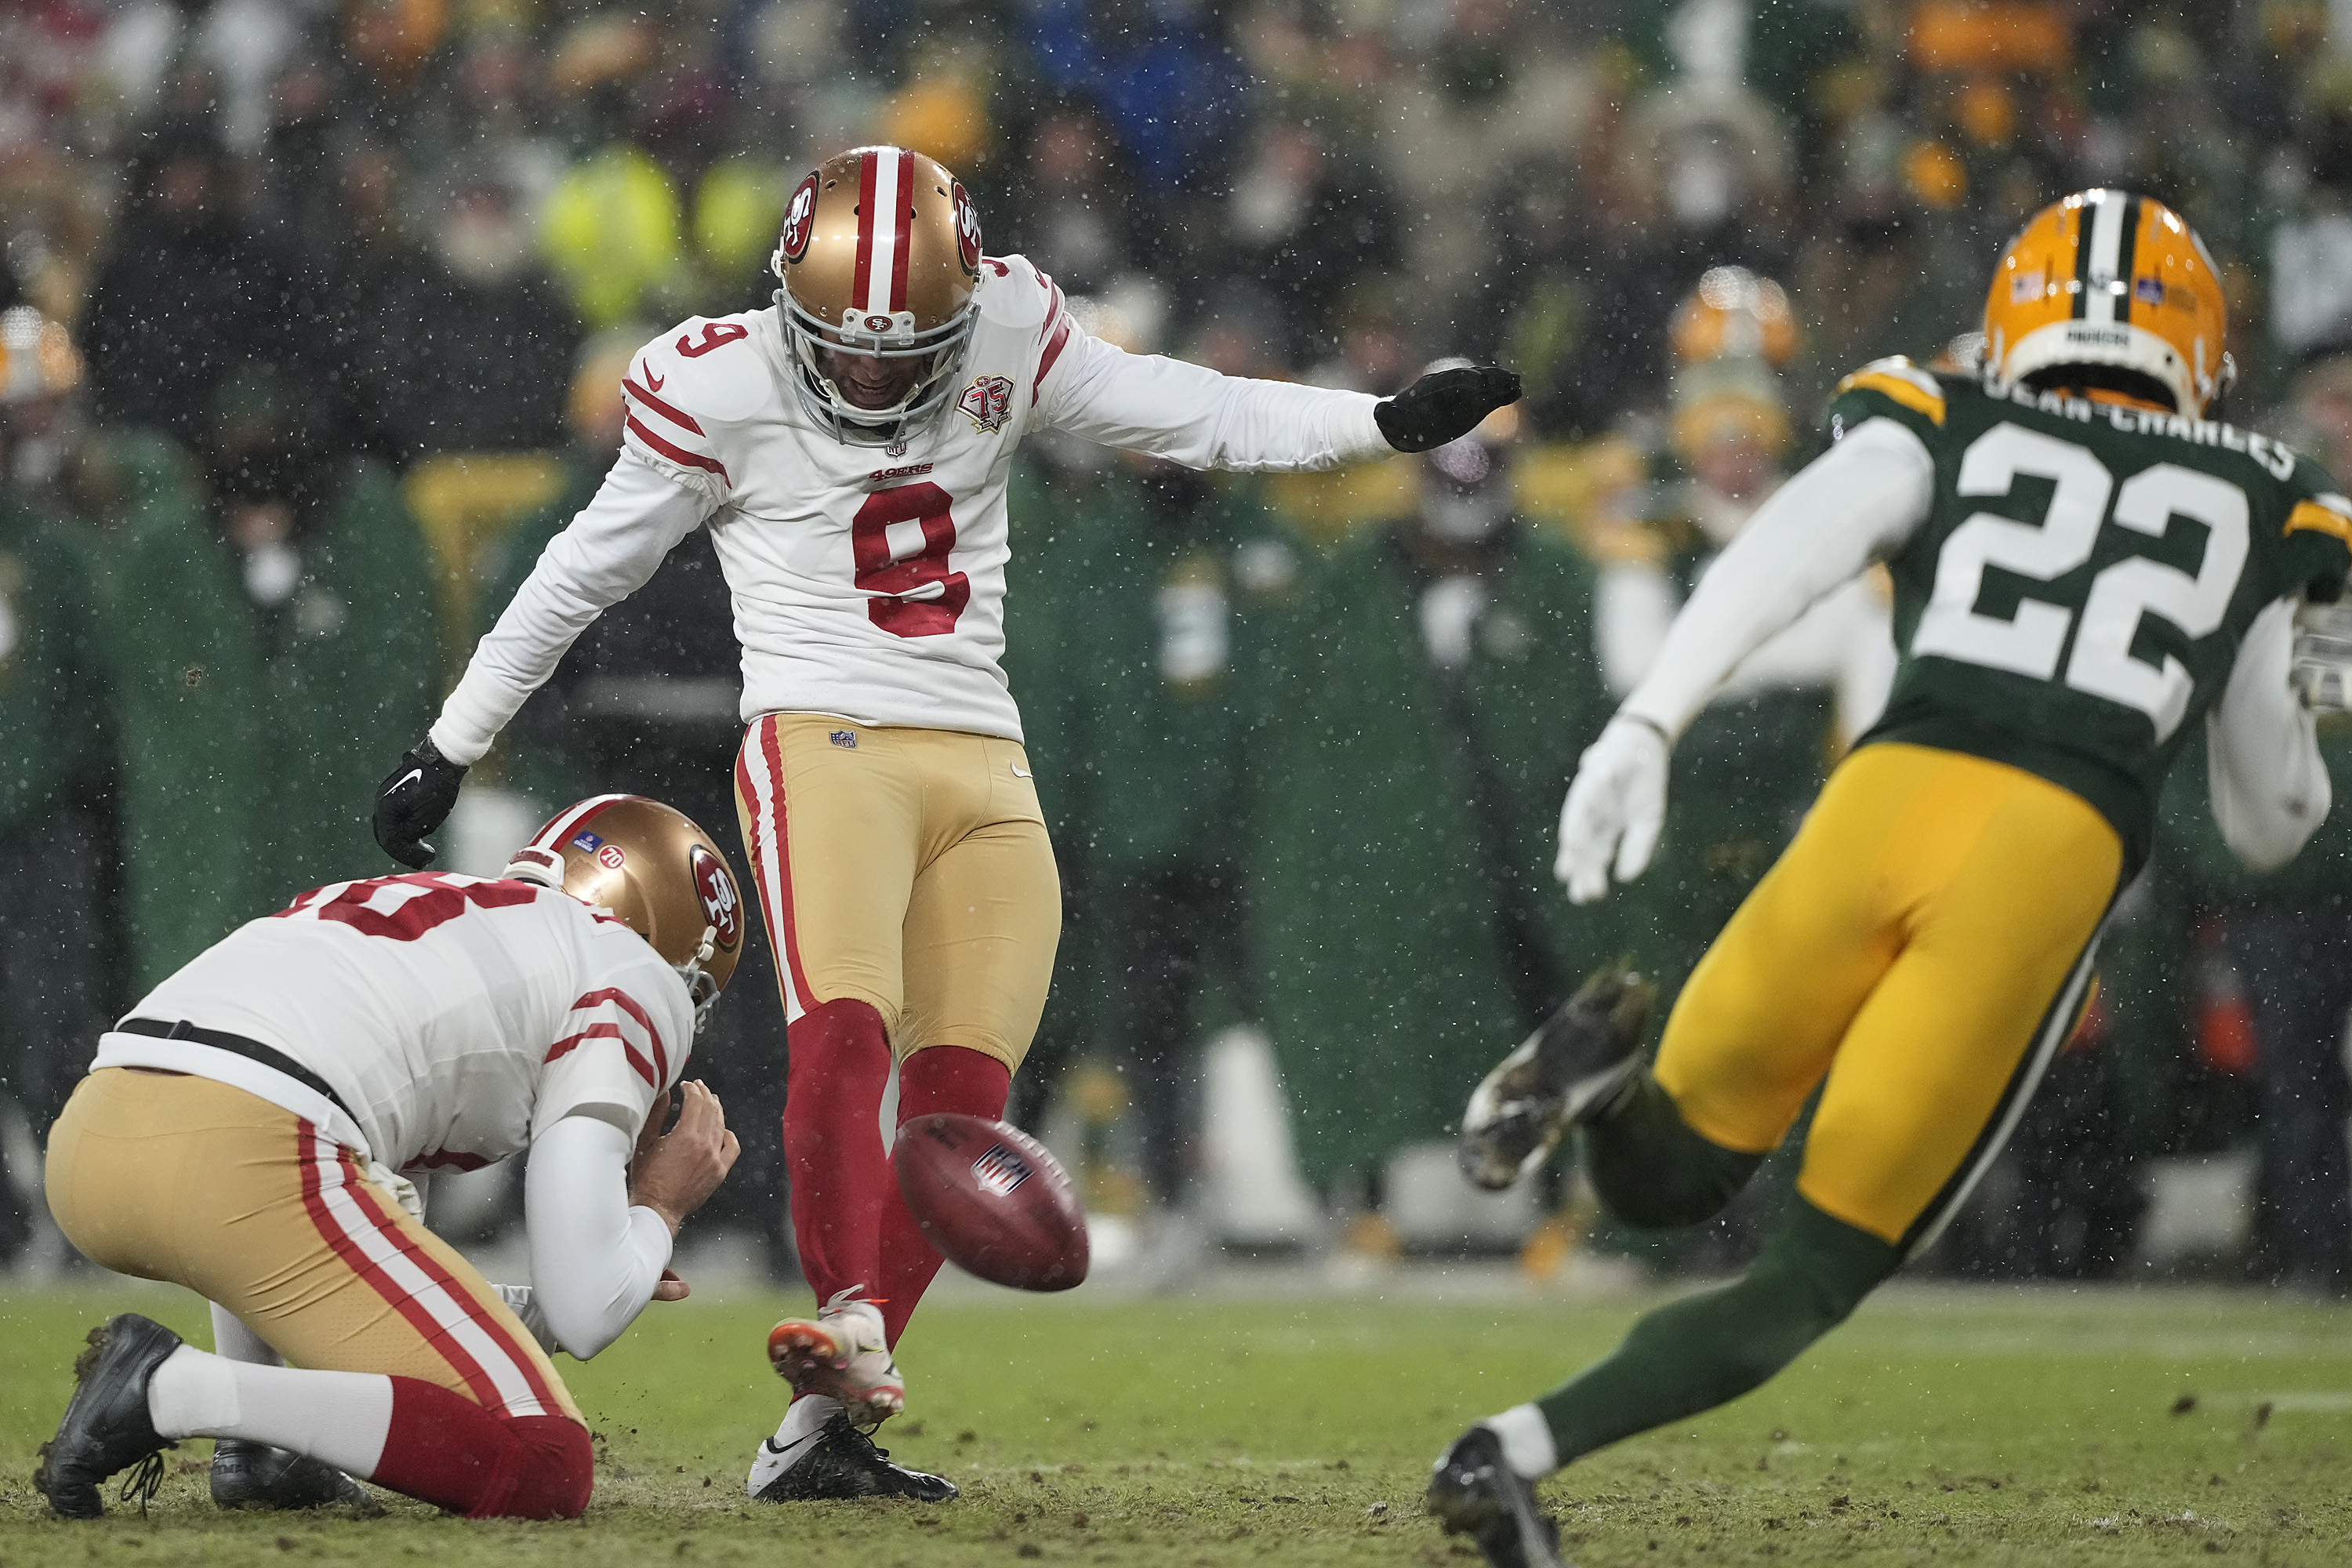 Kicker Robbie Gould #9 of the San Francisco 49ers kicks an extra point during the 4th quarter of the NFC Divisional Playoff game against the Green Bay Packers at Lambeau Field on January 22, 2022 in Green Bay, Wisconsin.